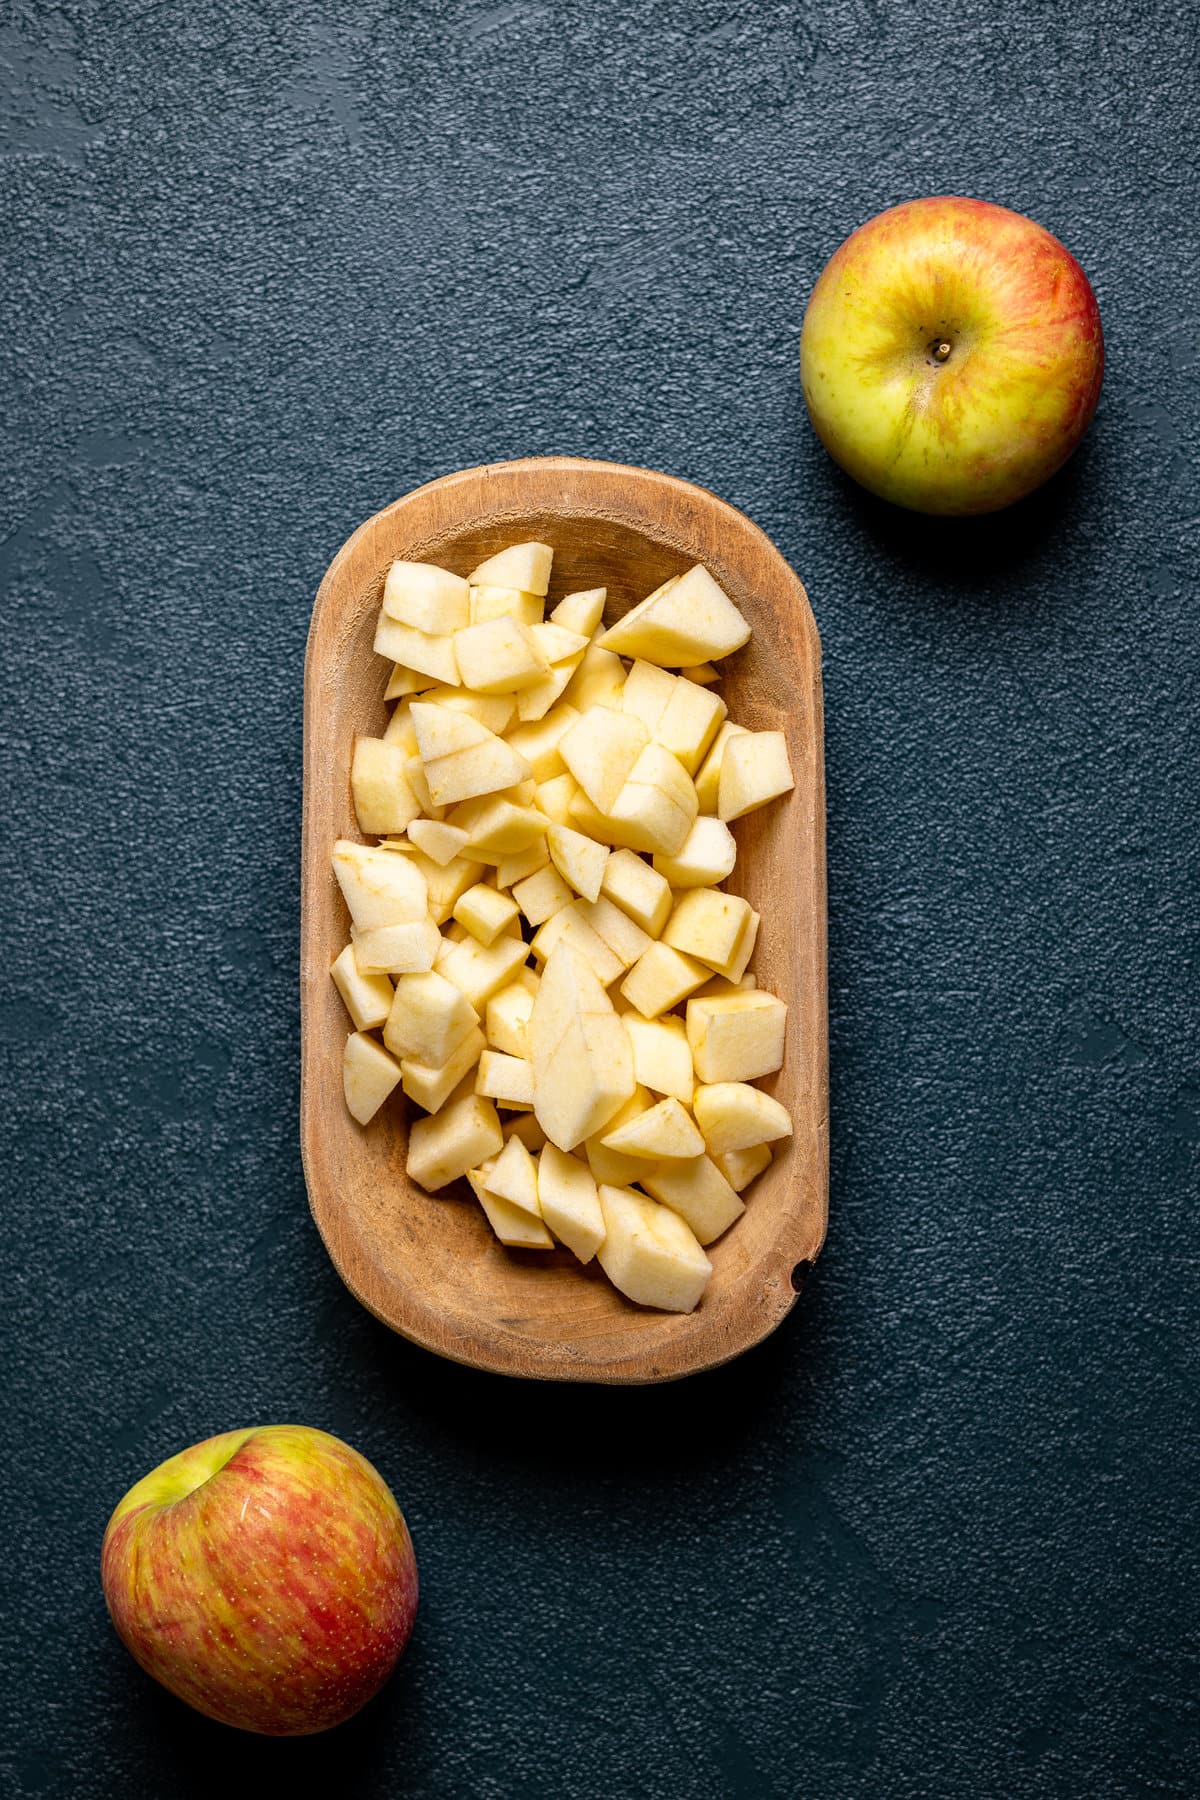 Wooden bowl of apple pieces next to apples